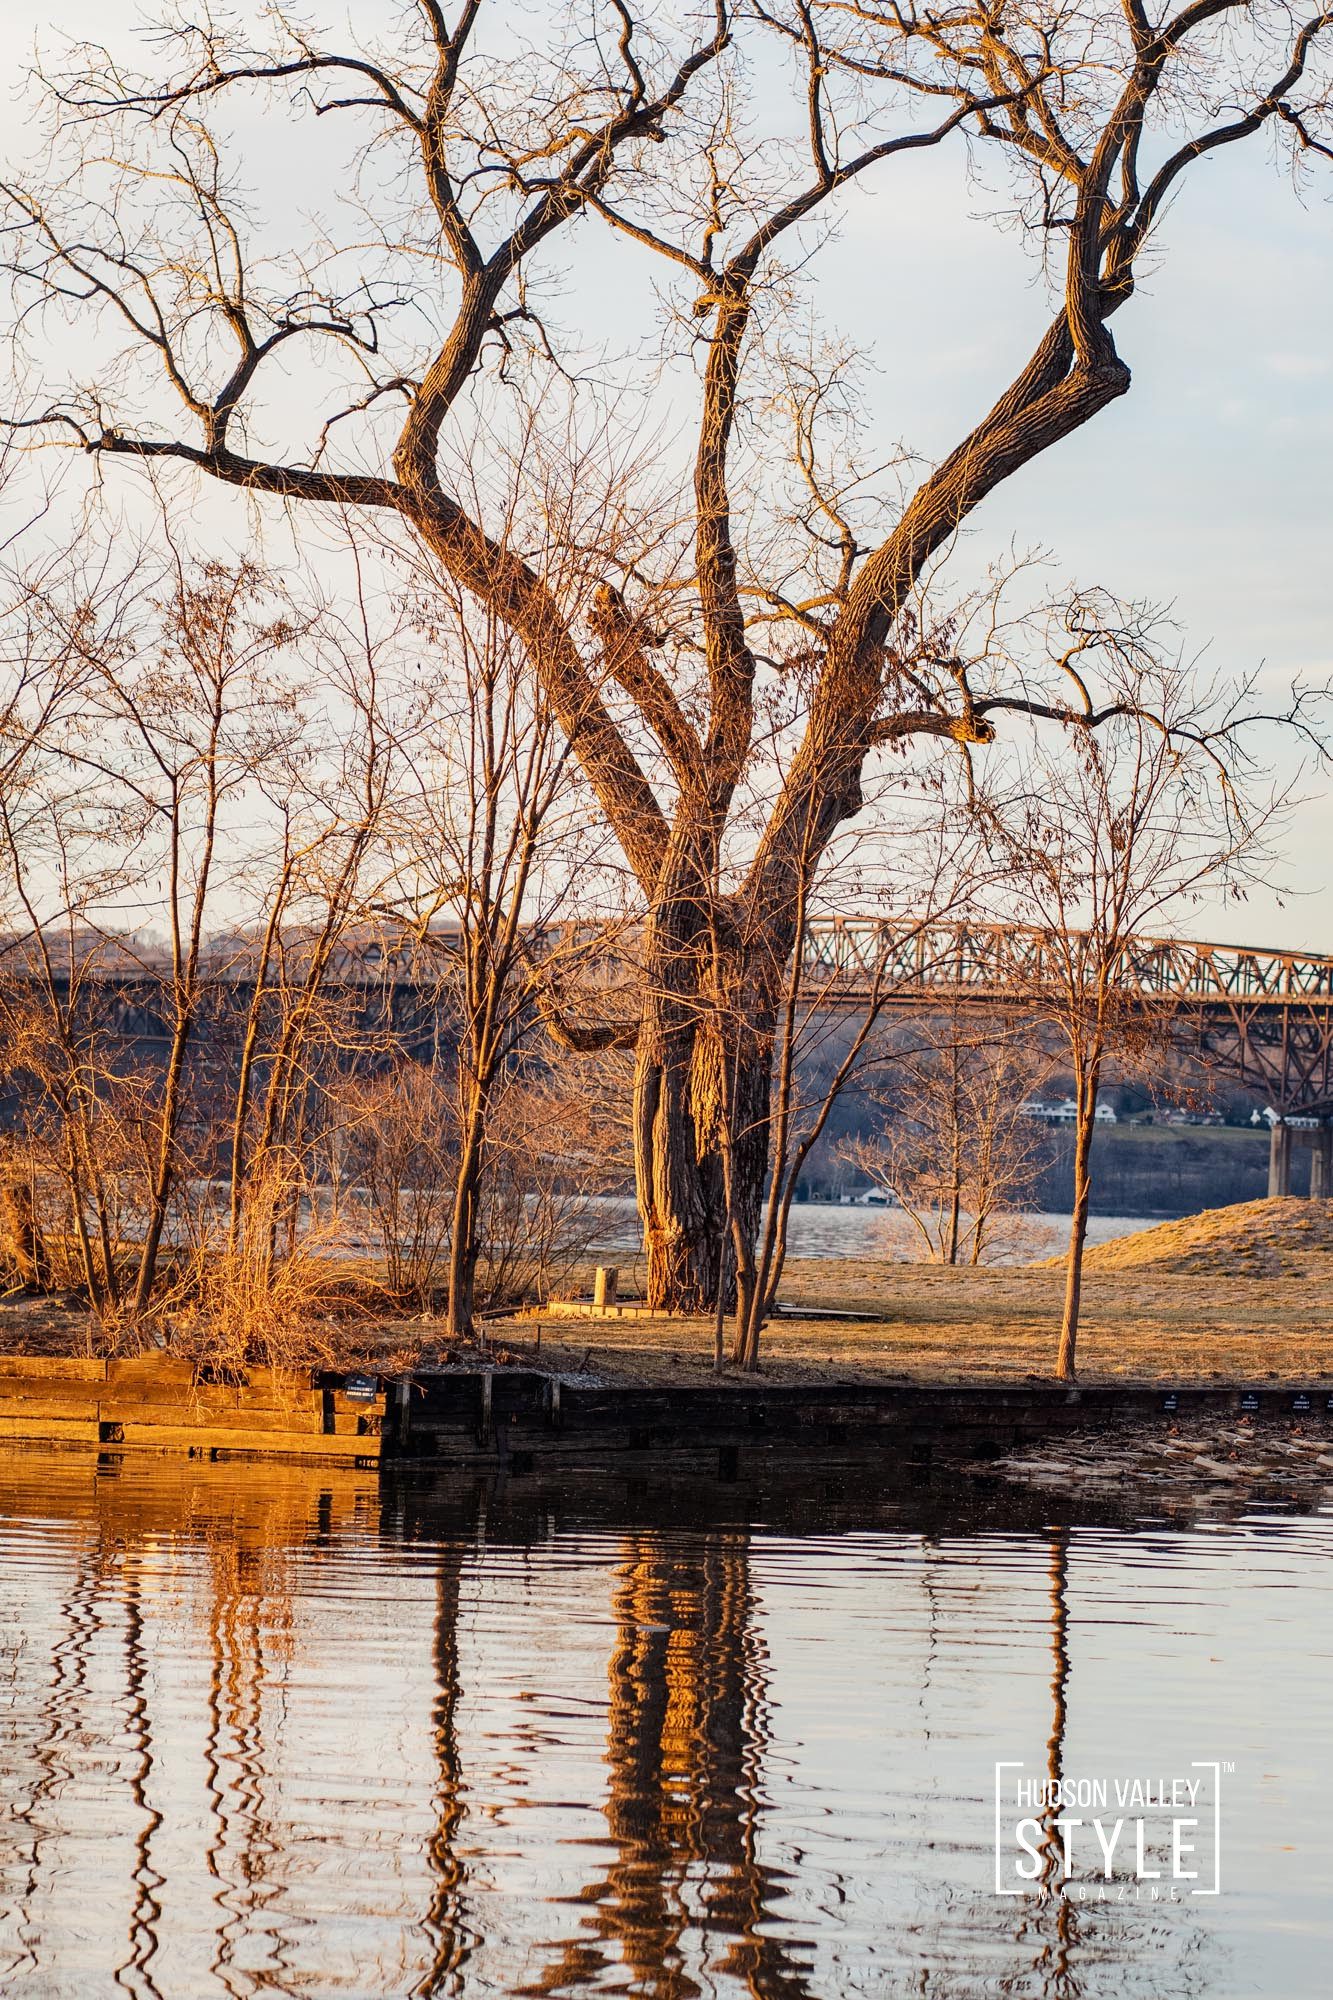 Chasing the Magic of Hudson Valley Sunsets: A Photographic Journey at Long Dock Park in Beacon, NY – Exploring Hudson Valley with Photographer Maxwell Alexander